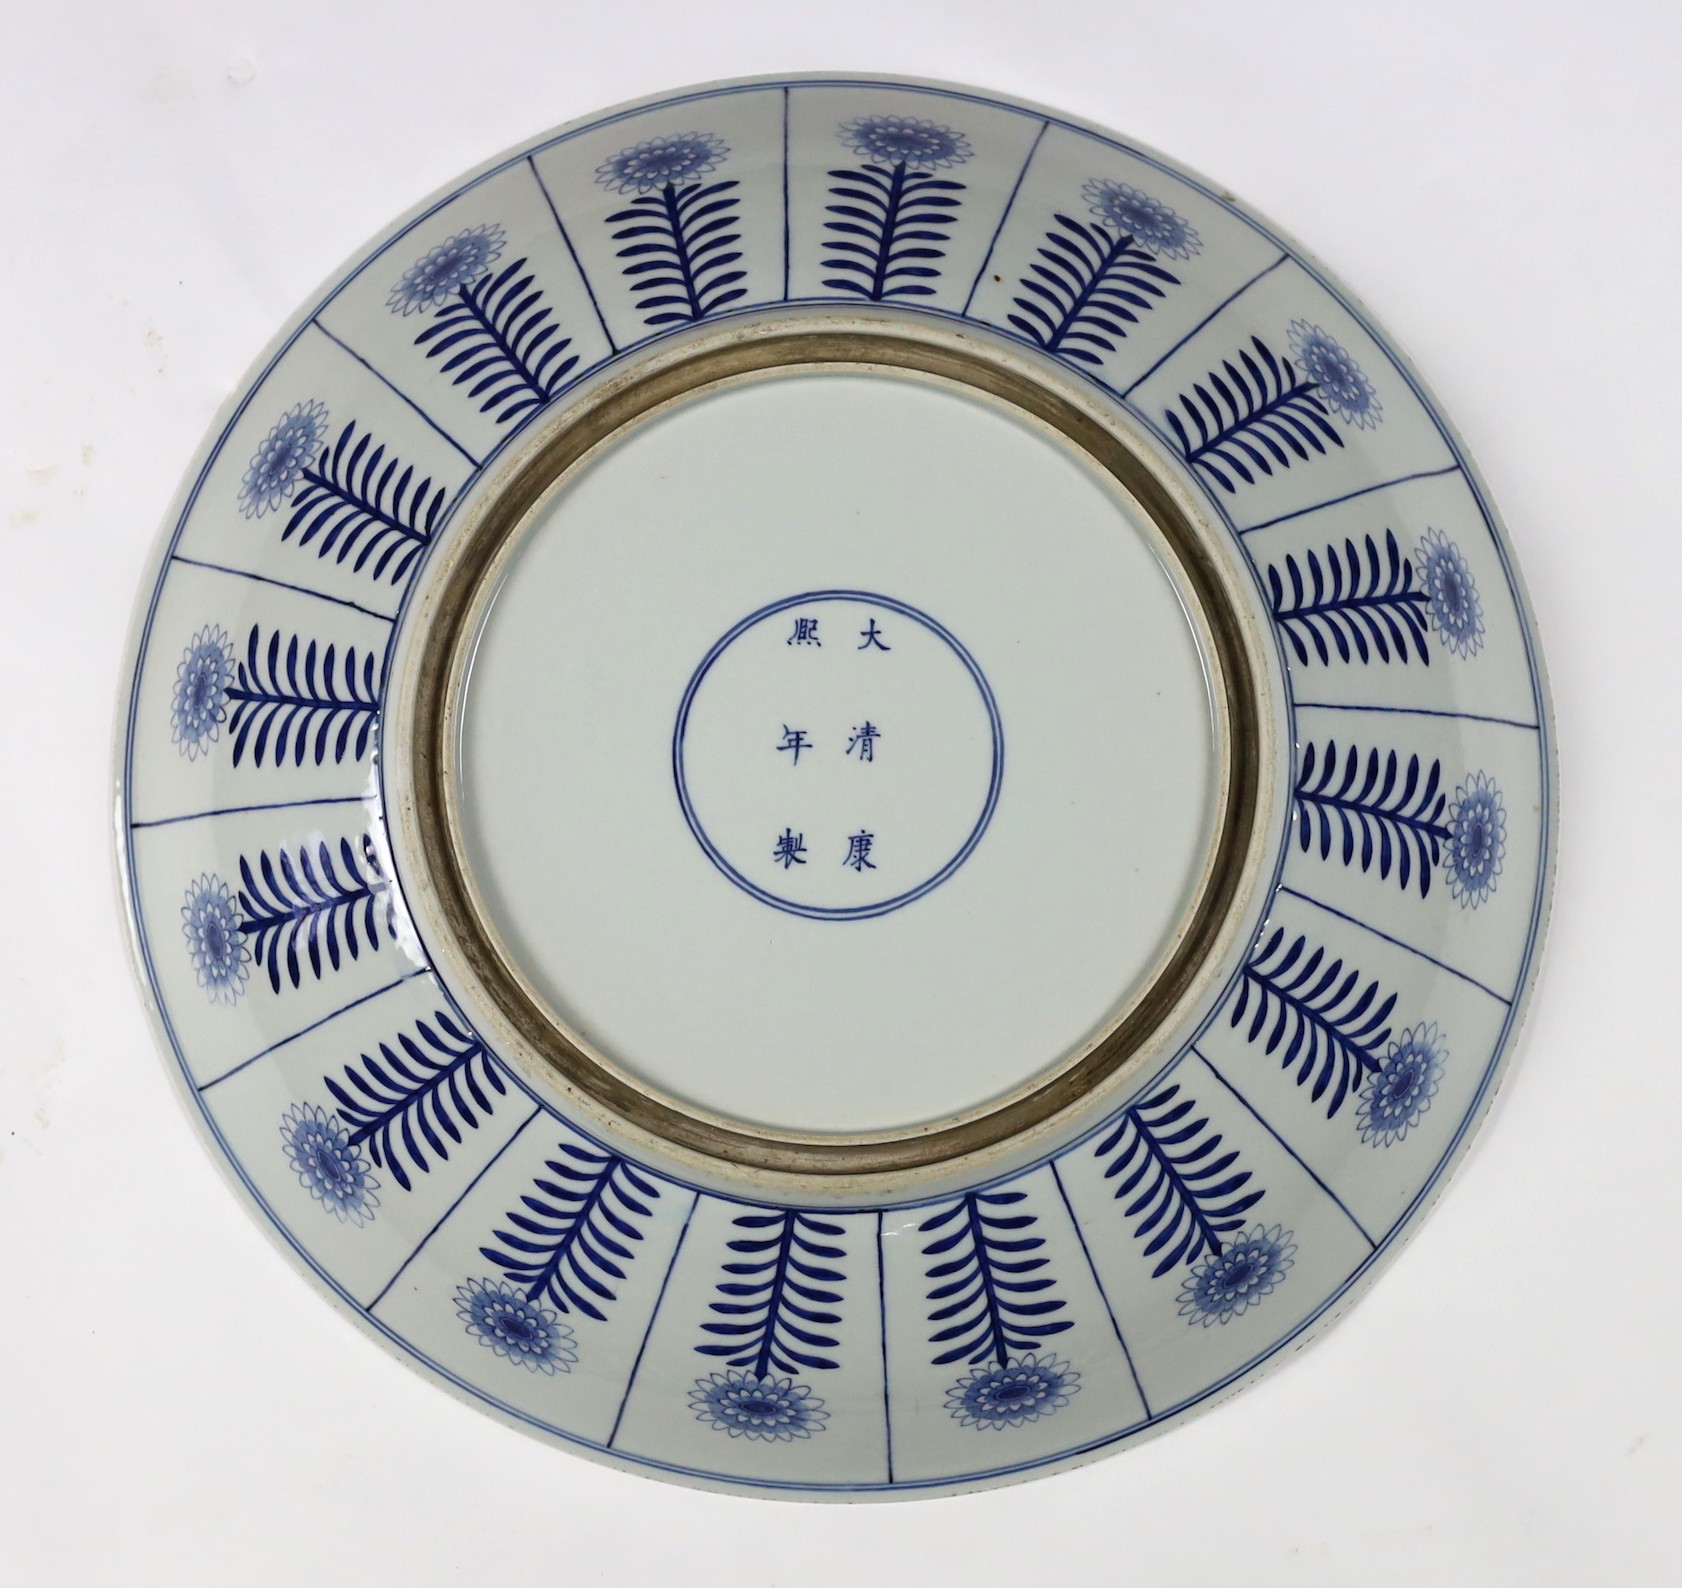 A pair of massive Chinese blue and white Aster pattern dishes, Kangxi mark but Republic period, 54.5cm diameter, one with a small section broken and restuck